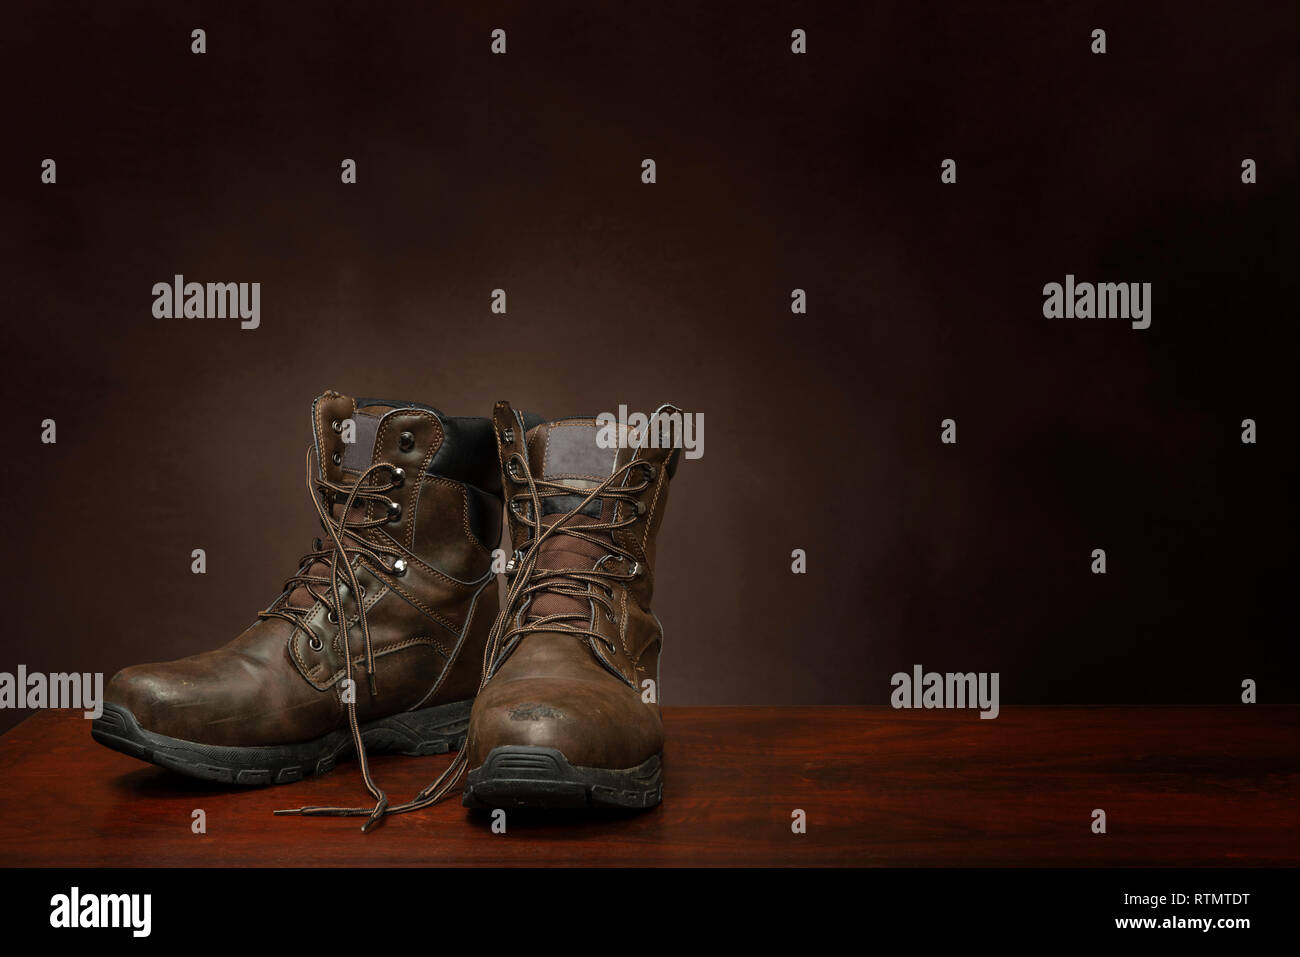 Horizontal shot of a pair of old work boots on a brown background with copy space.  The boots are in the lower left hand corner. Stock Photo